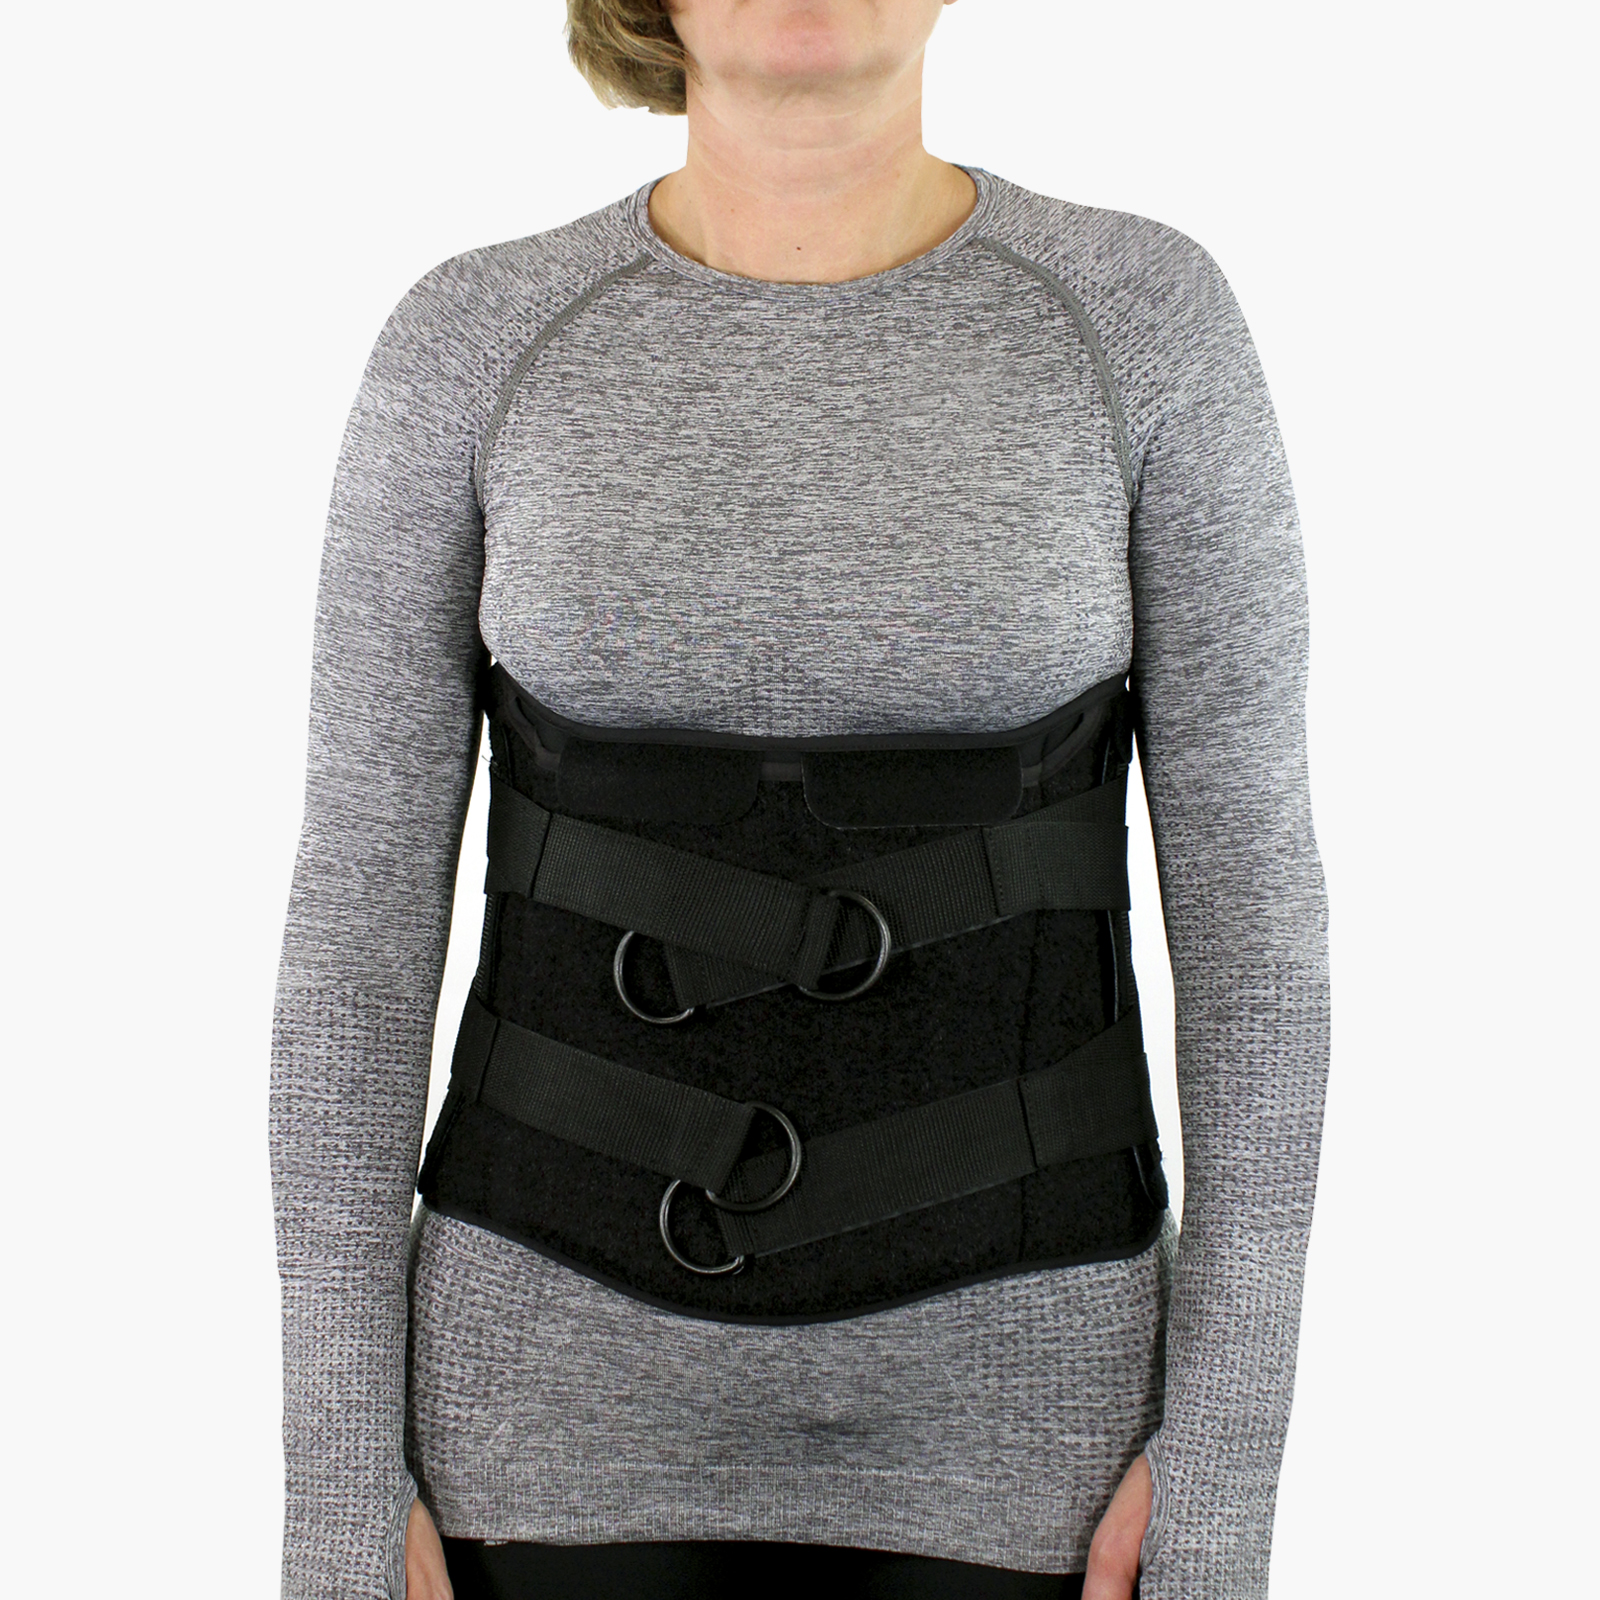 Post Operative Spinal Braces for Back Injury Reduction in LA